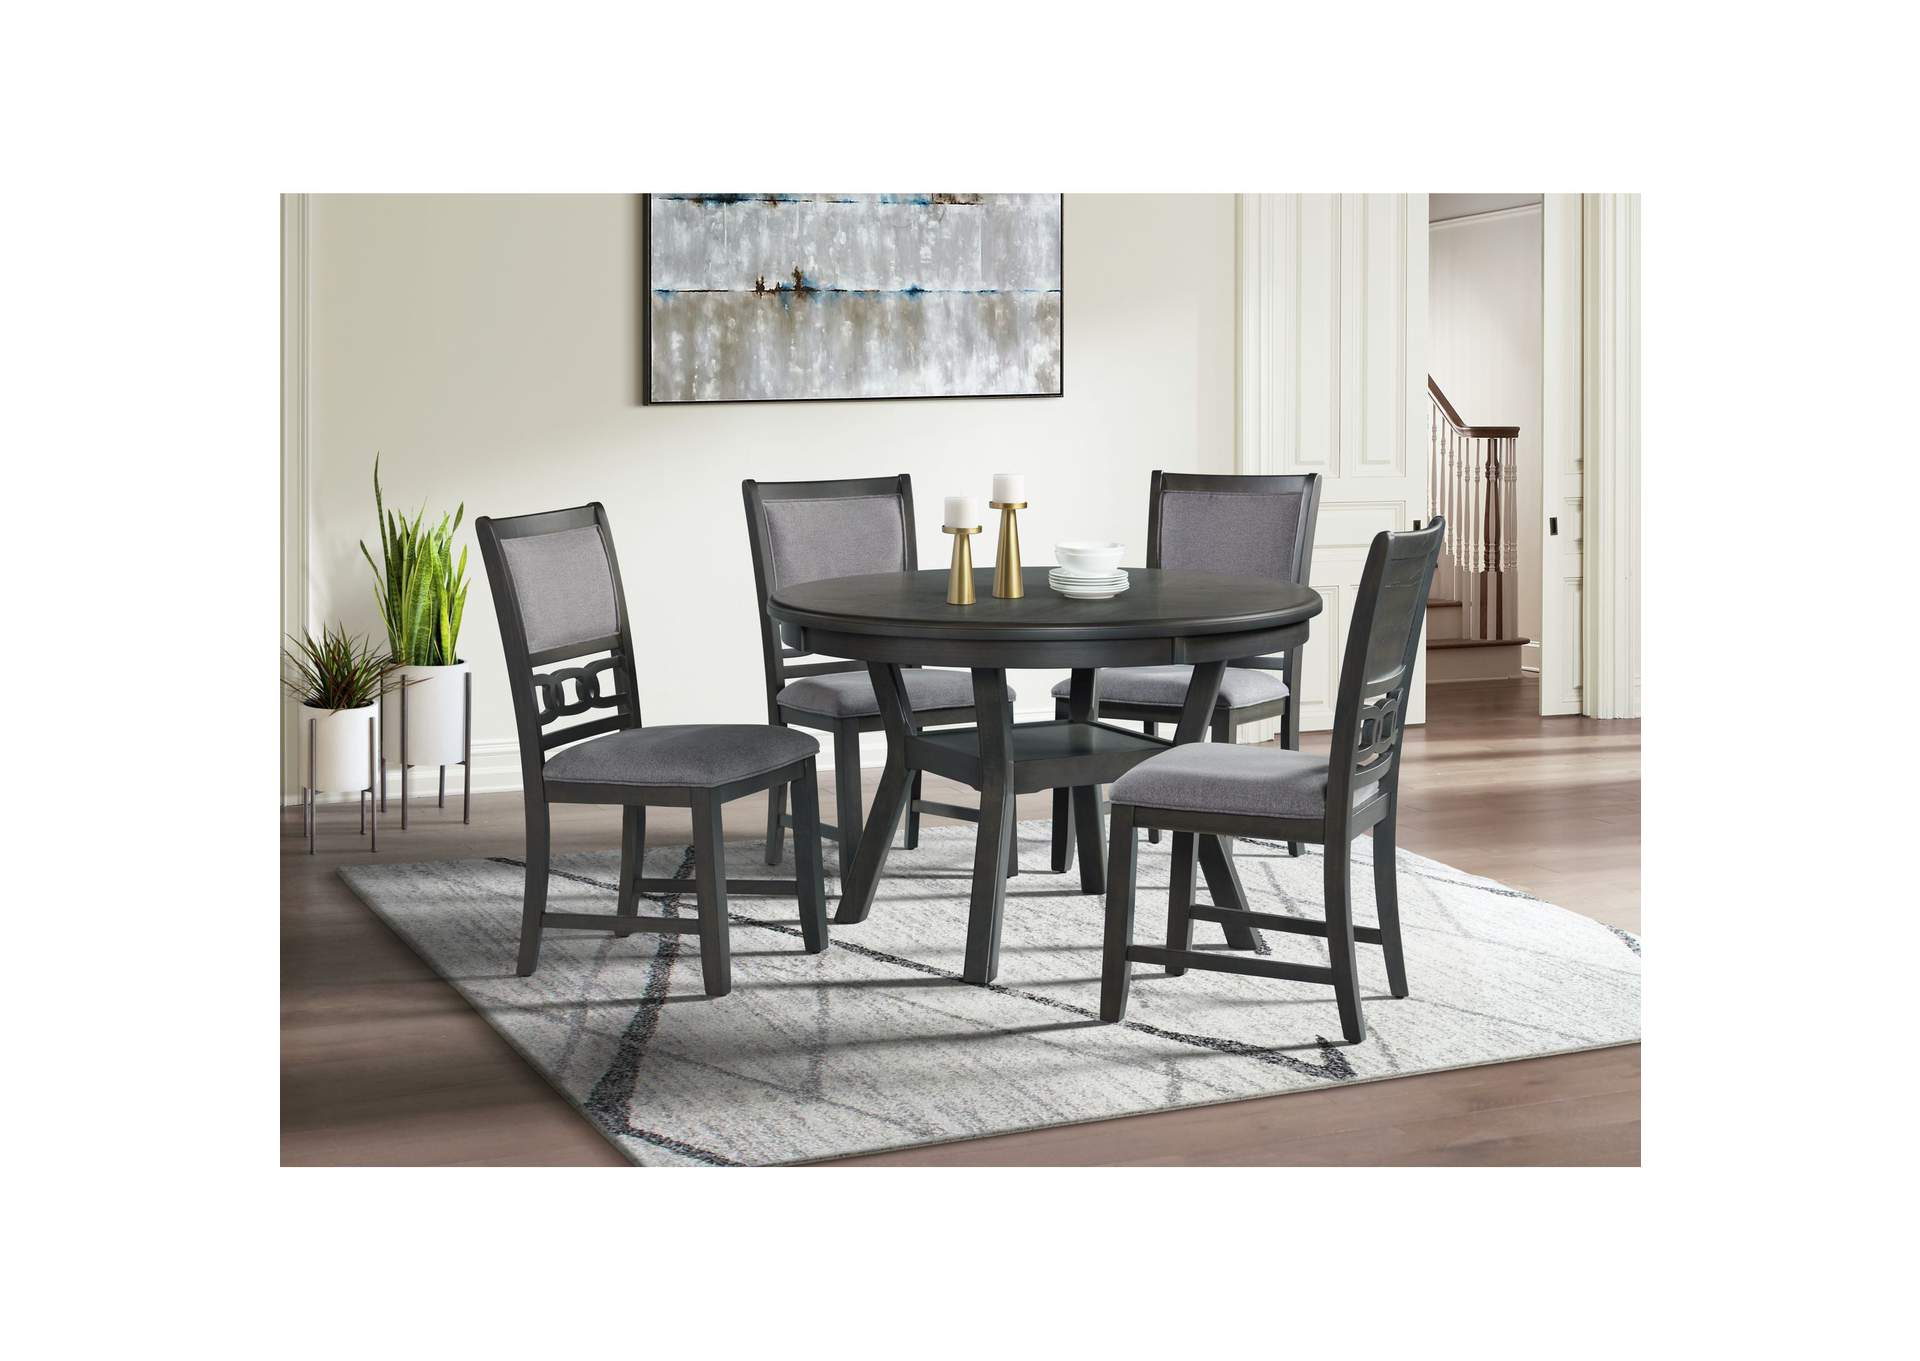 Amherst Dining Side Chair With Fabric Cushion Side Stretcher Grey Finish 2 Per Pack,Elements